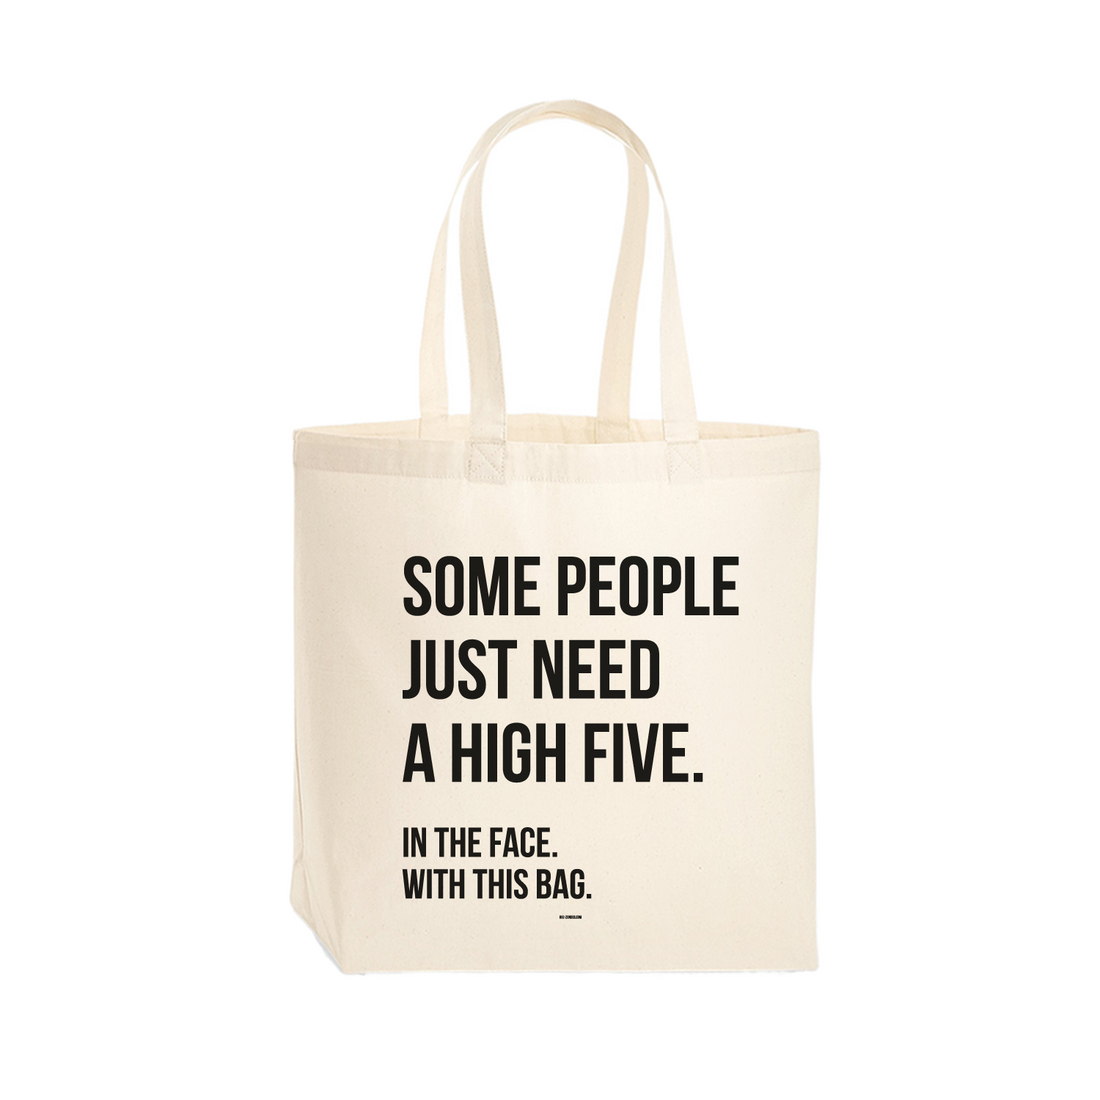 Baumwolltasche - Some people just need a high five in the face with this bag